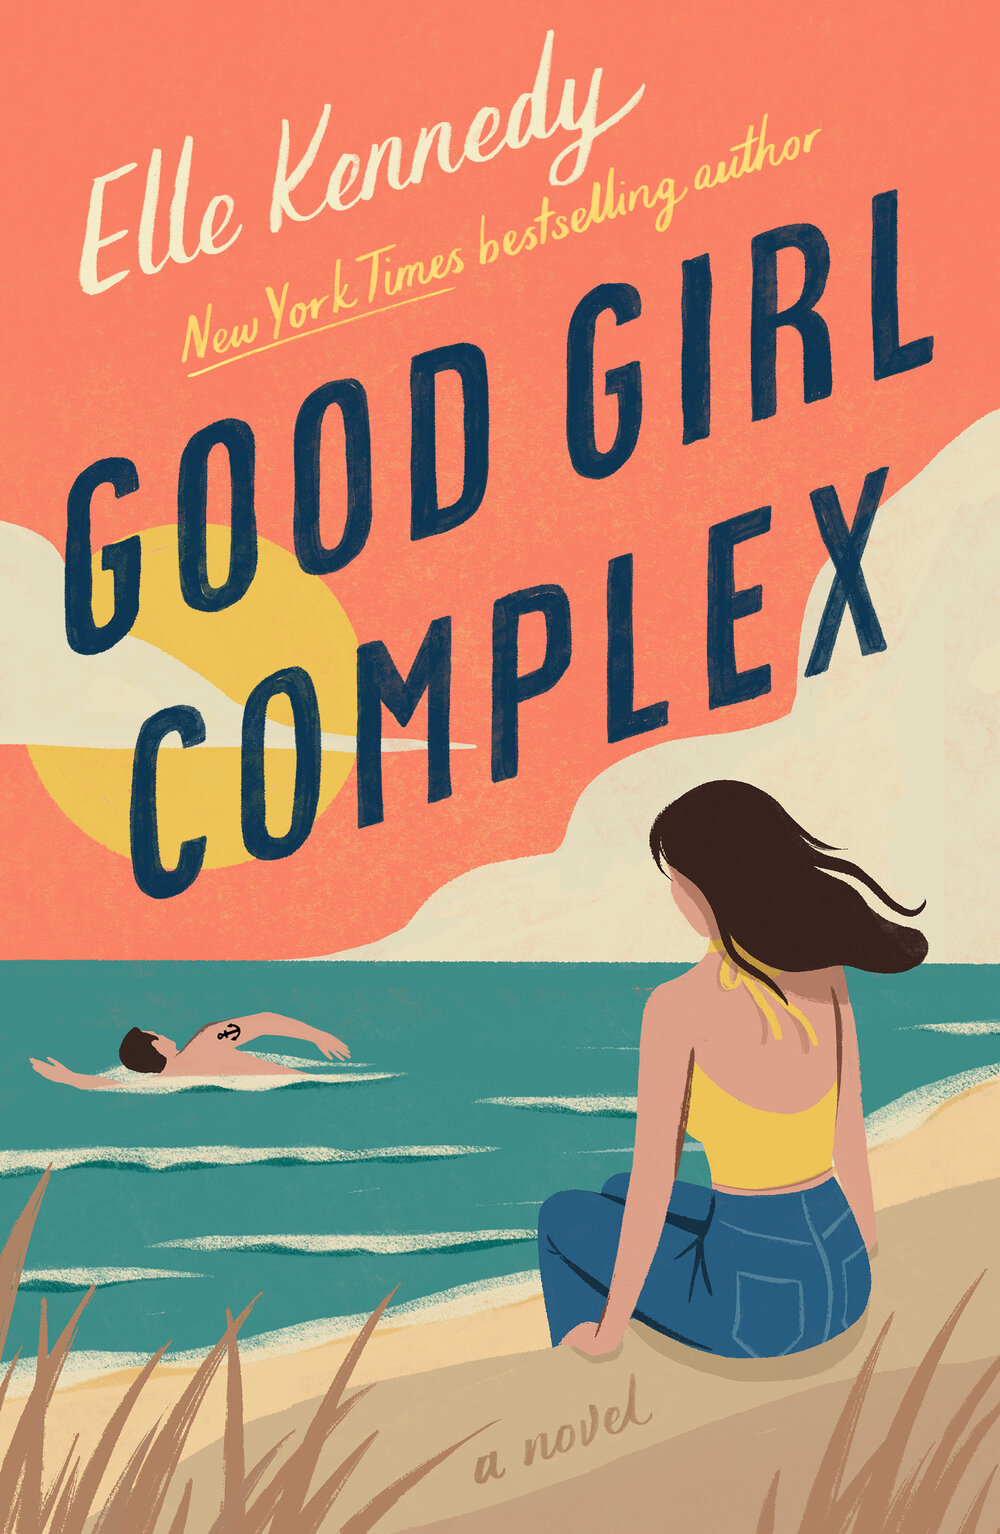 Can T Wait Wednesday Good Girl Complex By Elle Kennedy The Bookish Libra